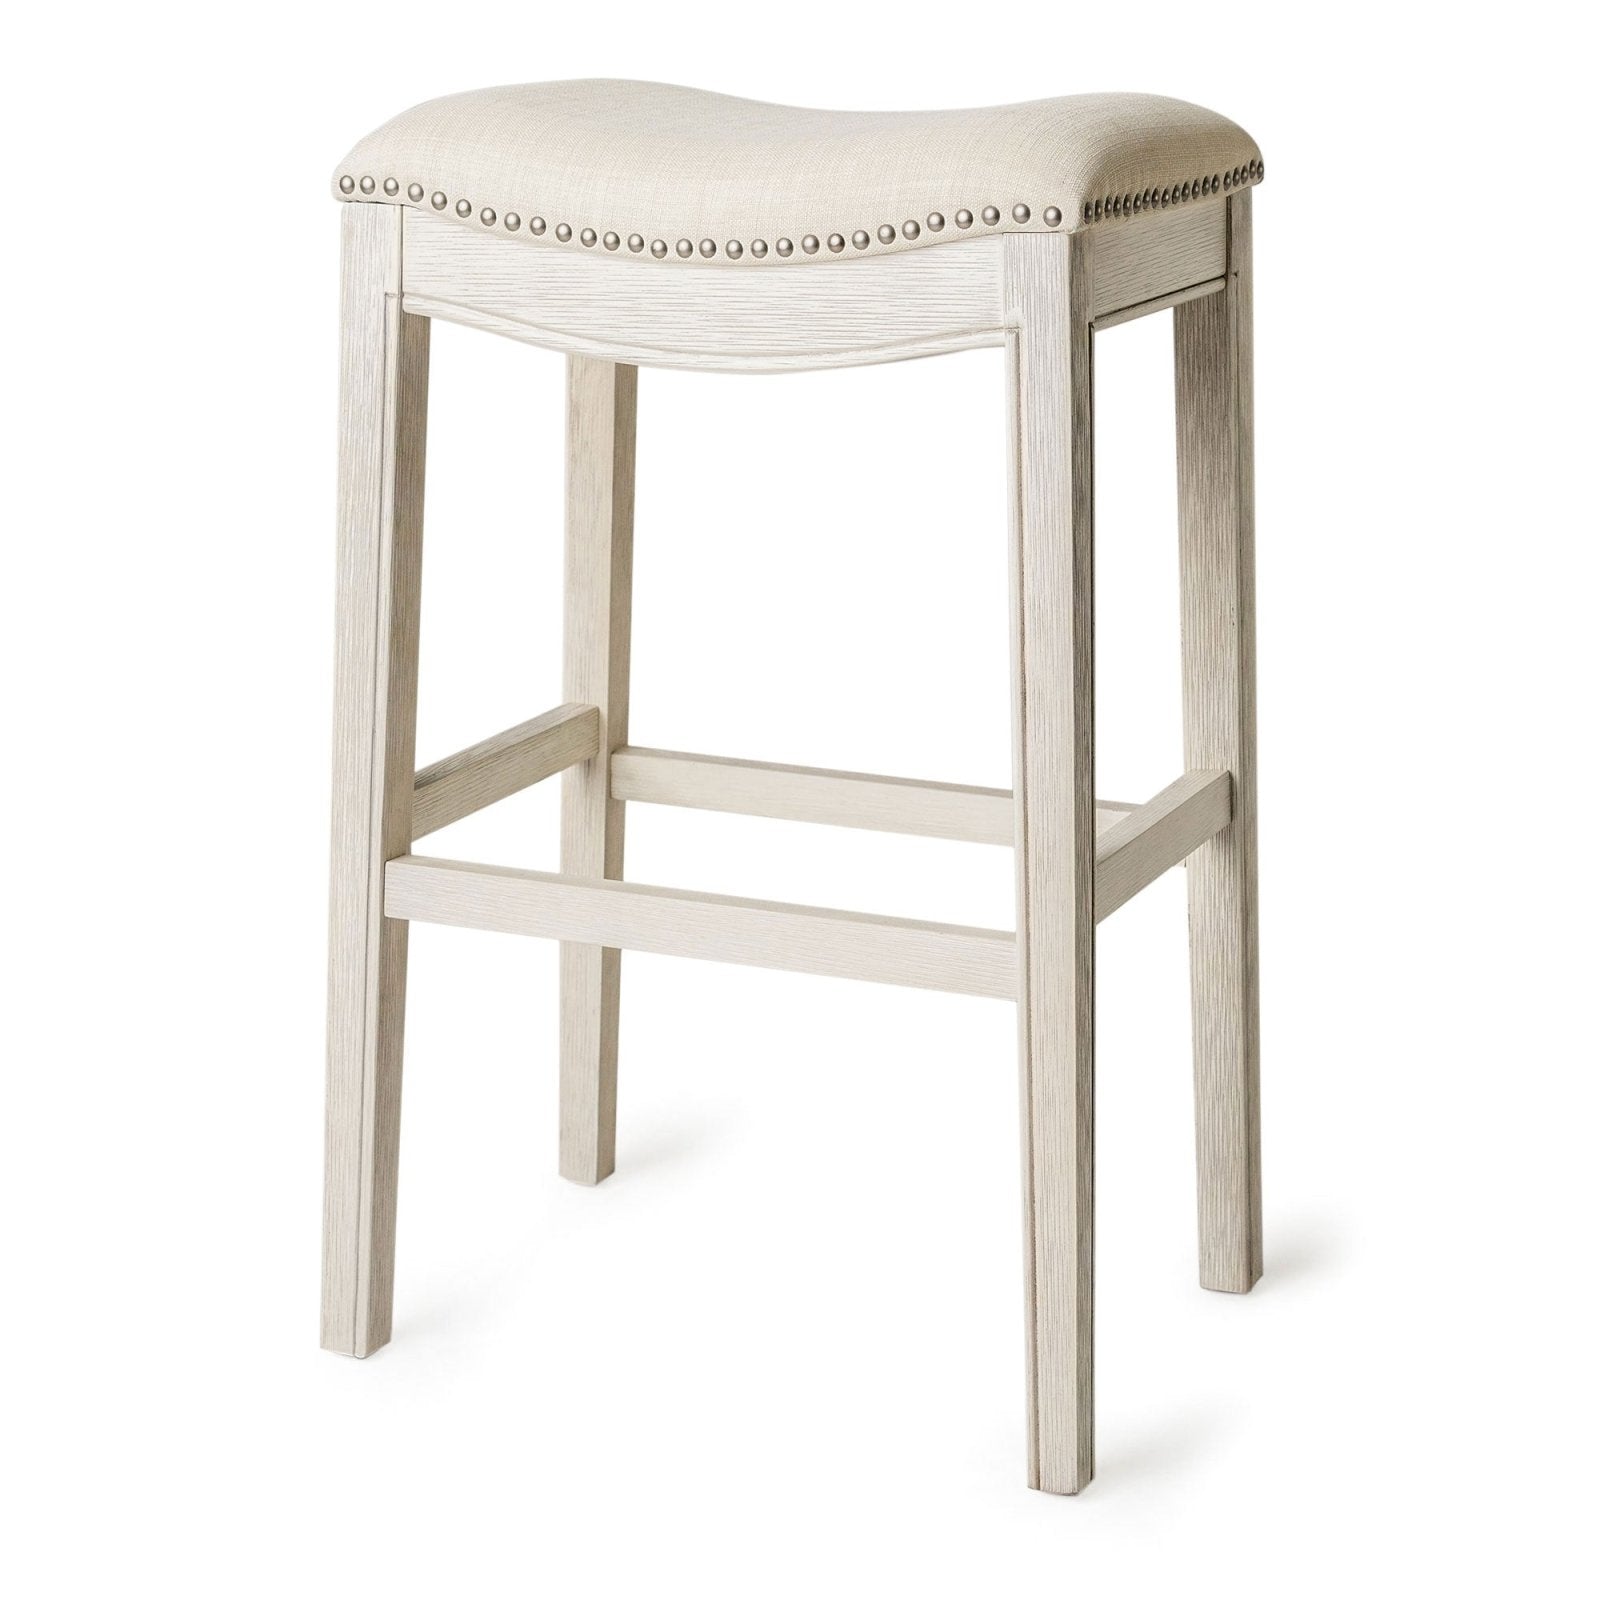 Adrien Saddle Bar Stool in White Oak Finish with Natural Fabric Upholstery in Stools by Maven Lane